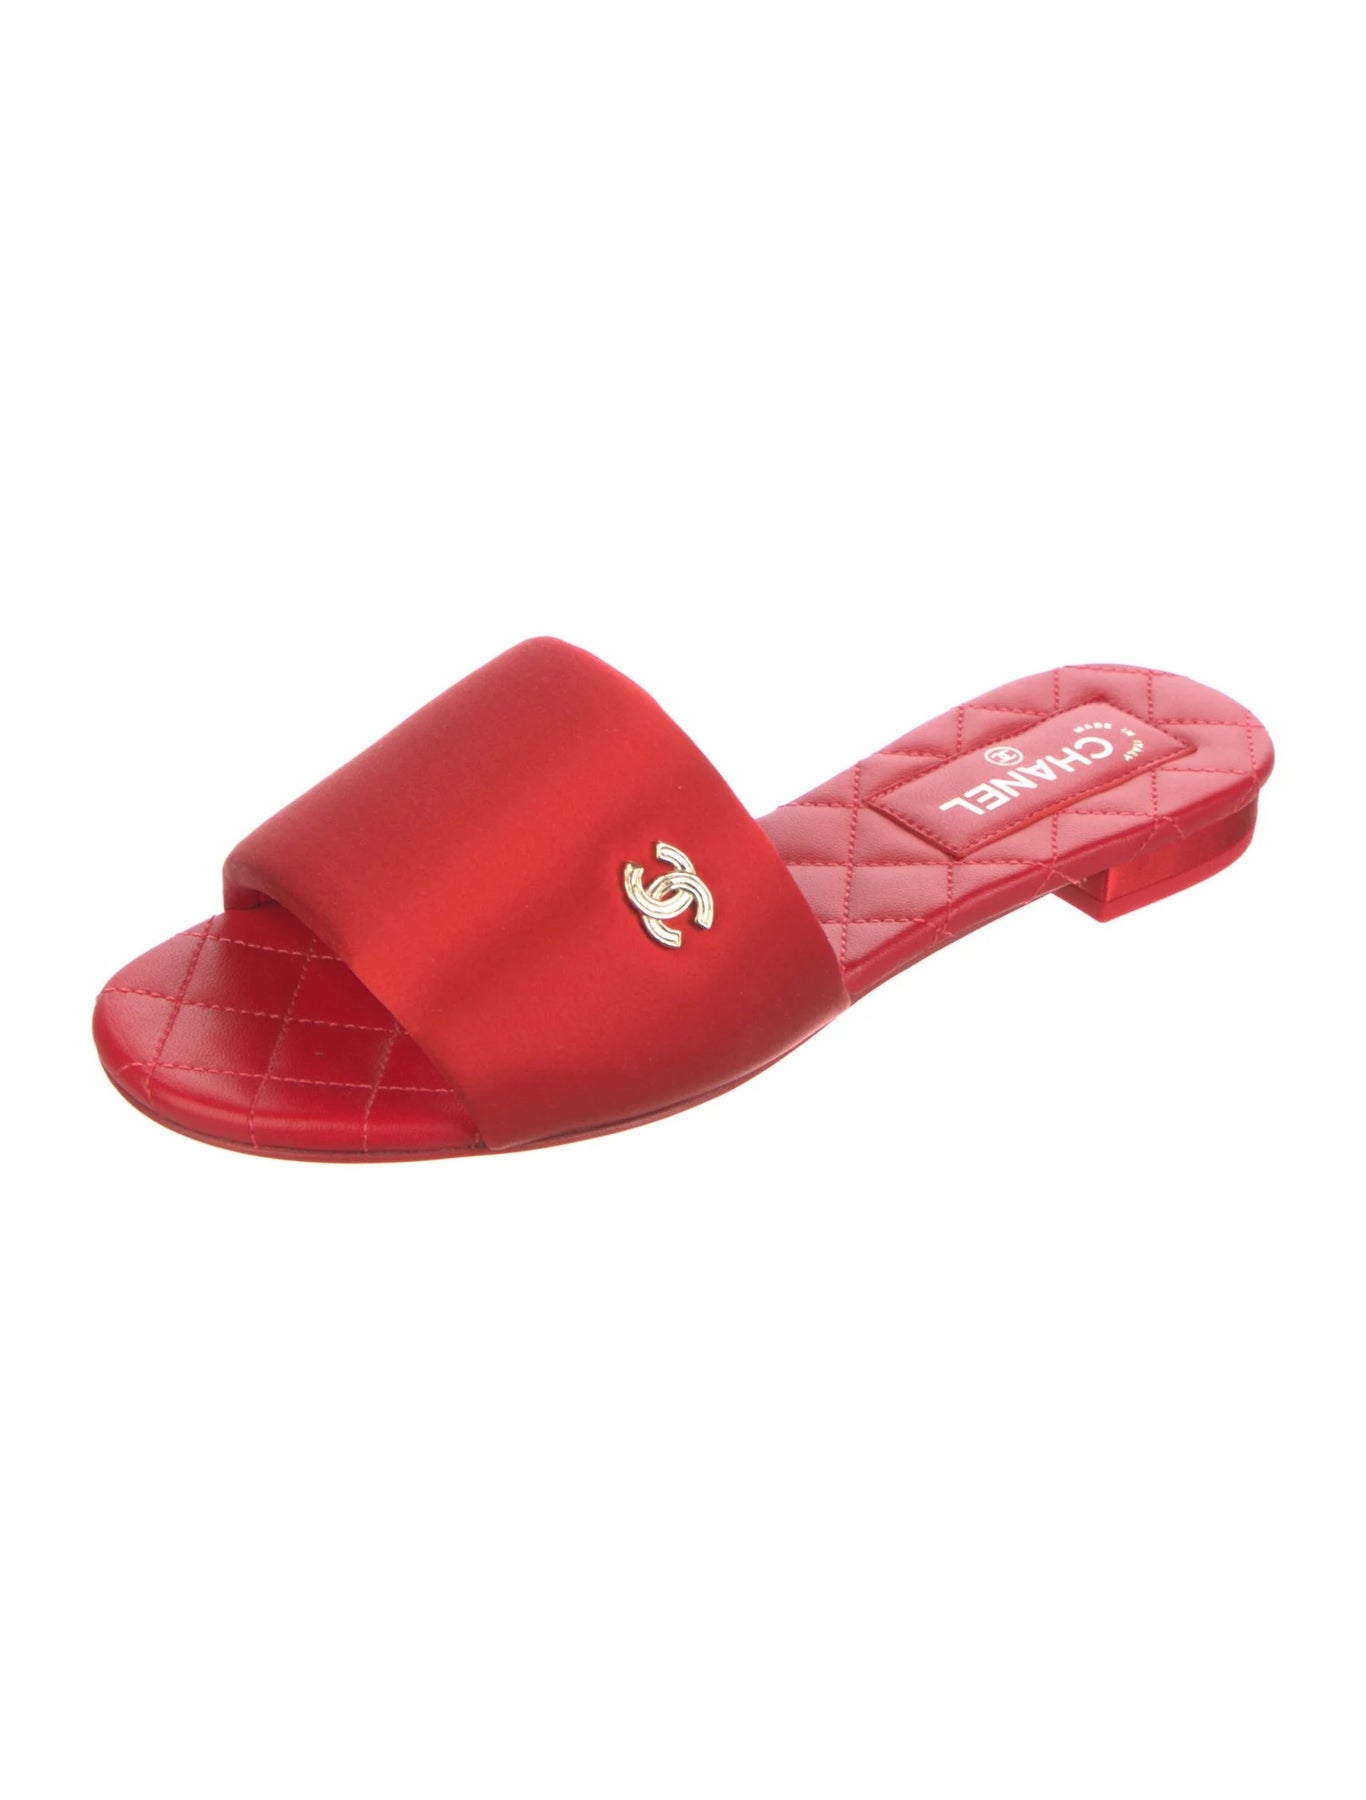 chanel red clogs